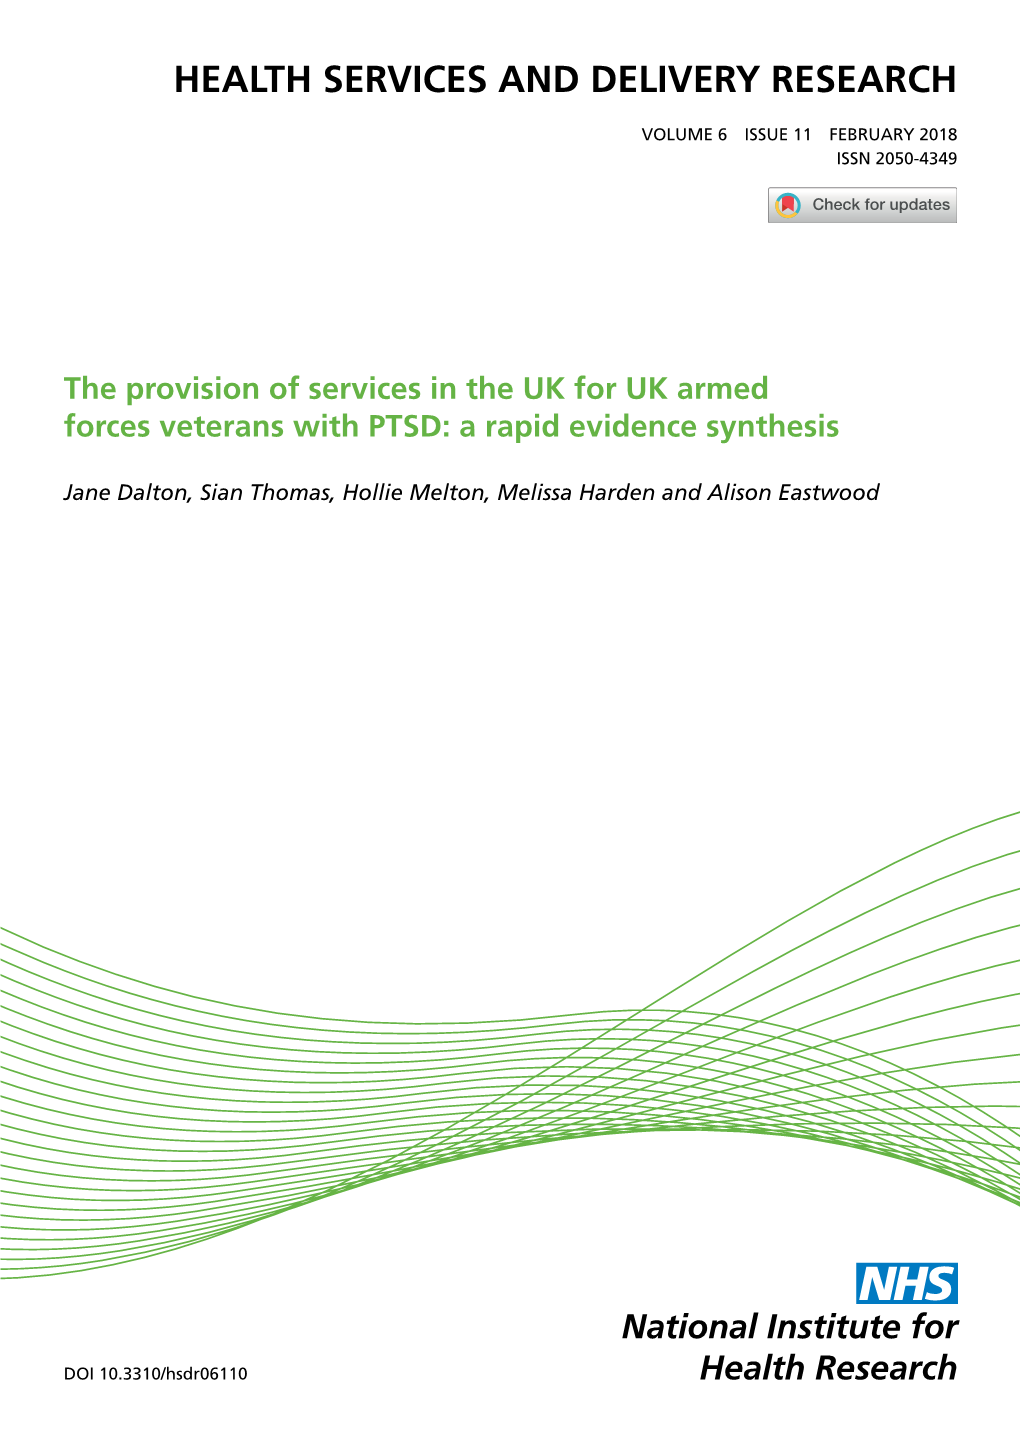 The Provision of Services in the UK for UK Armed Forces Veterans with PTSD: a Rapid Evidence Synthesis